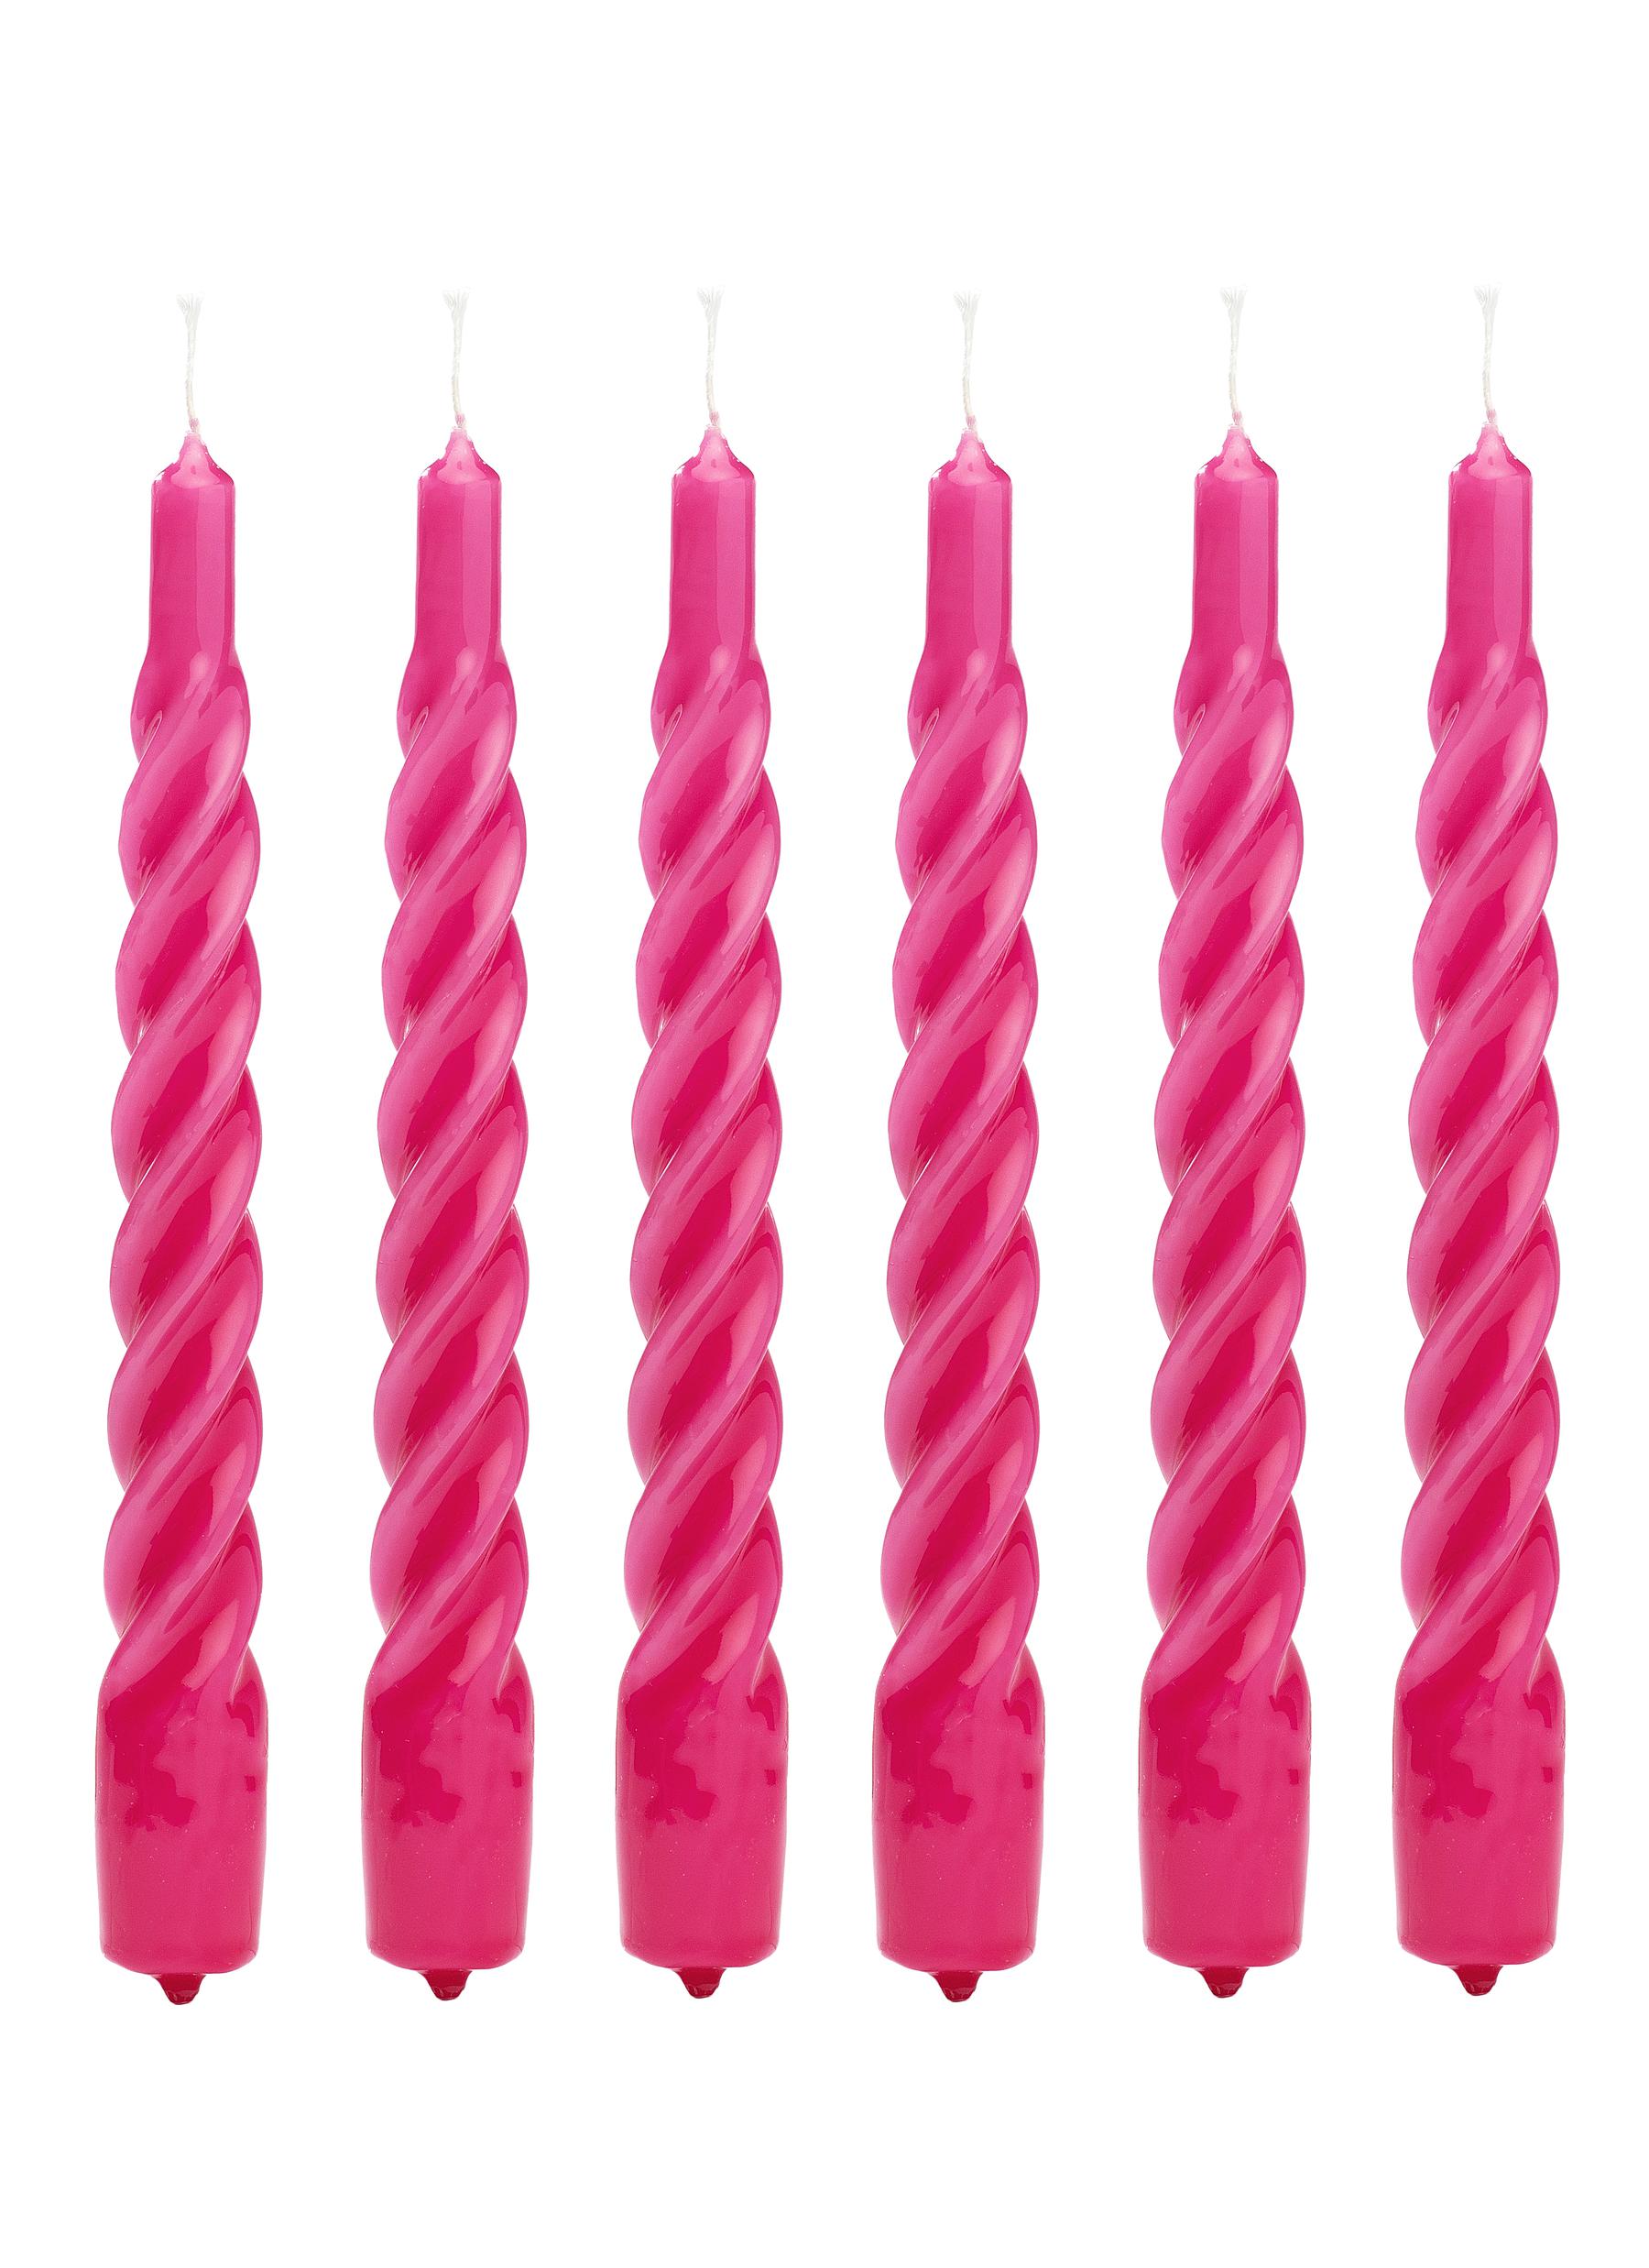 Anna + Nina Twisted Candle 6-piece Set - Bright Pink